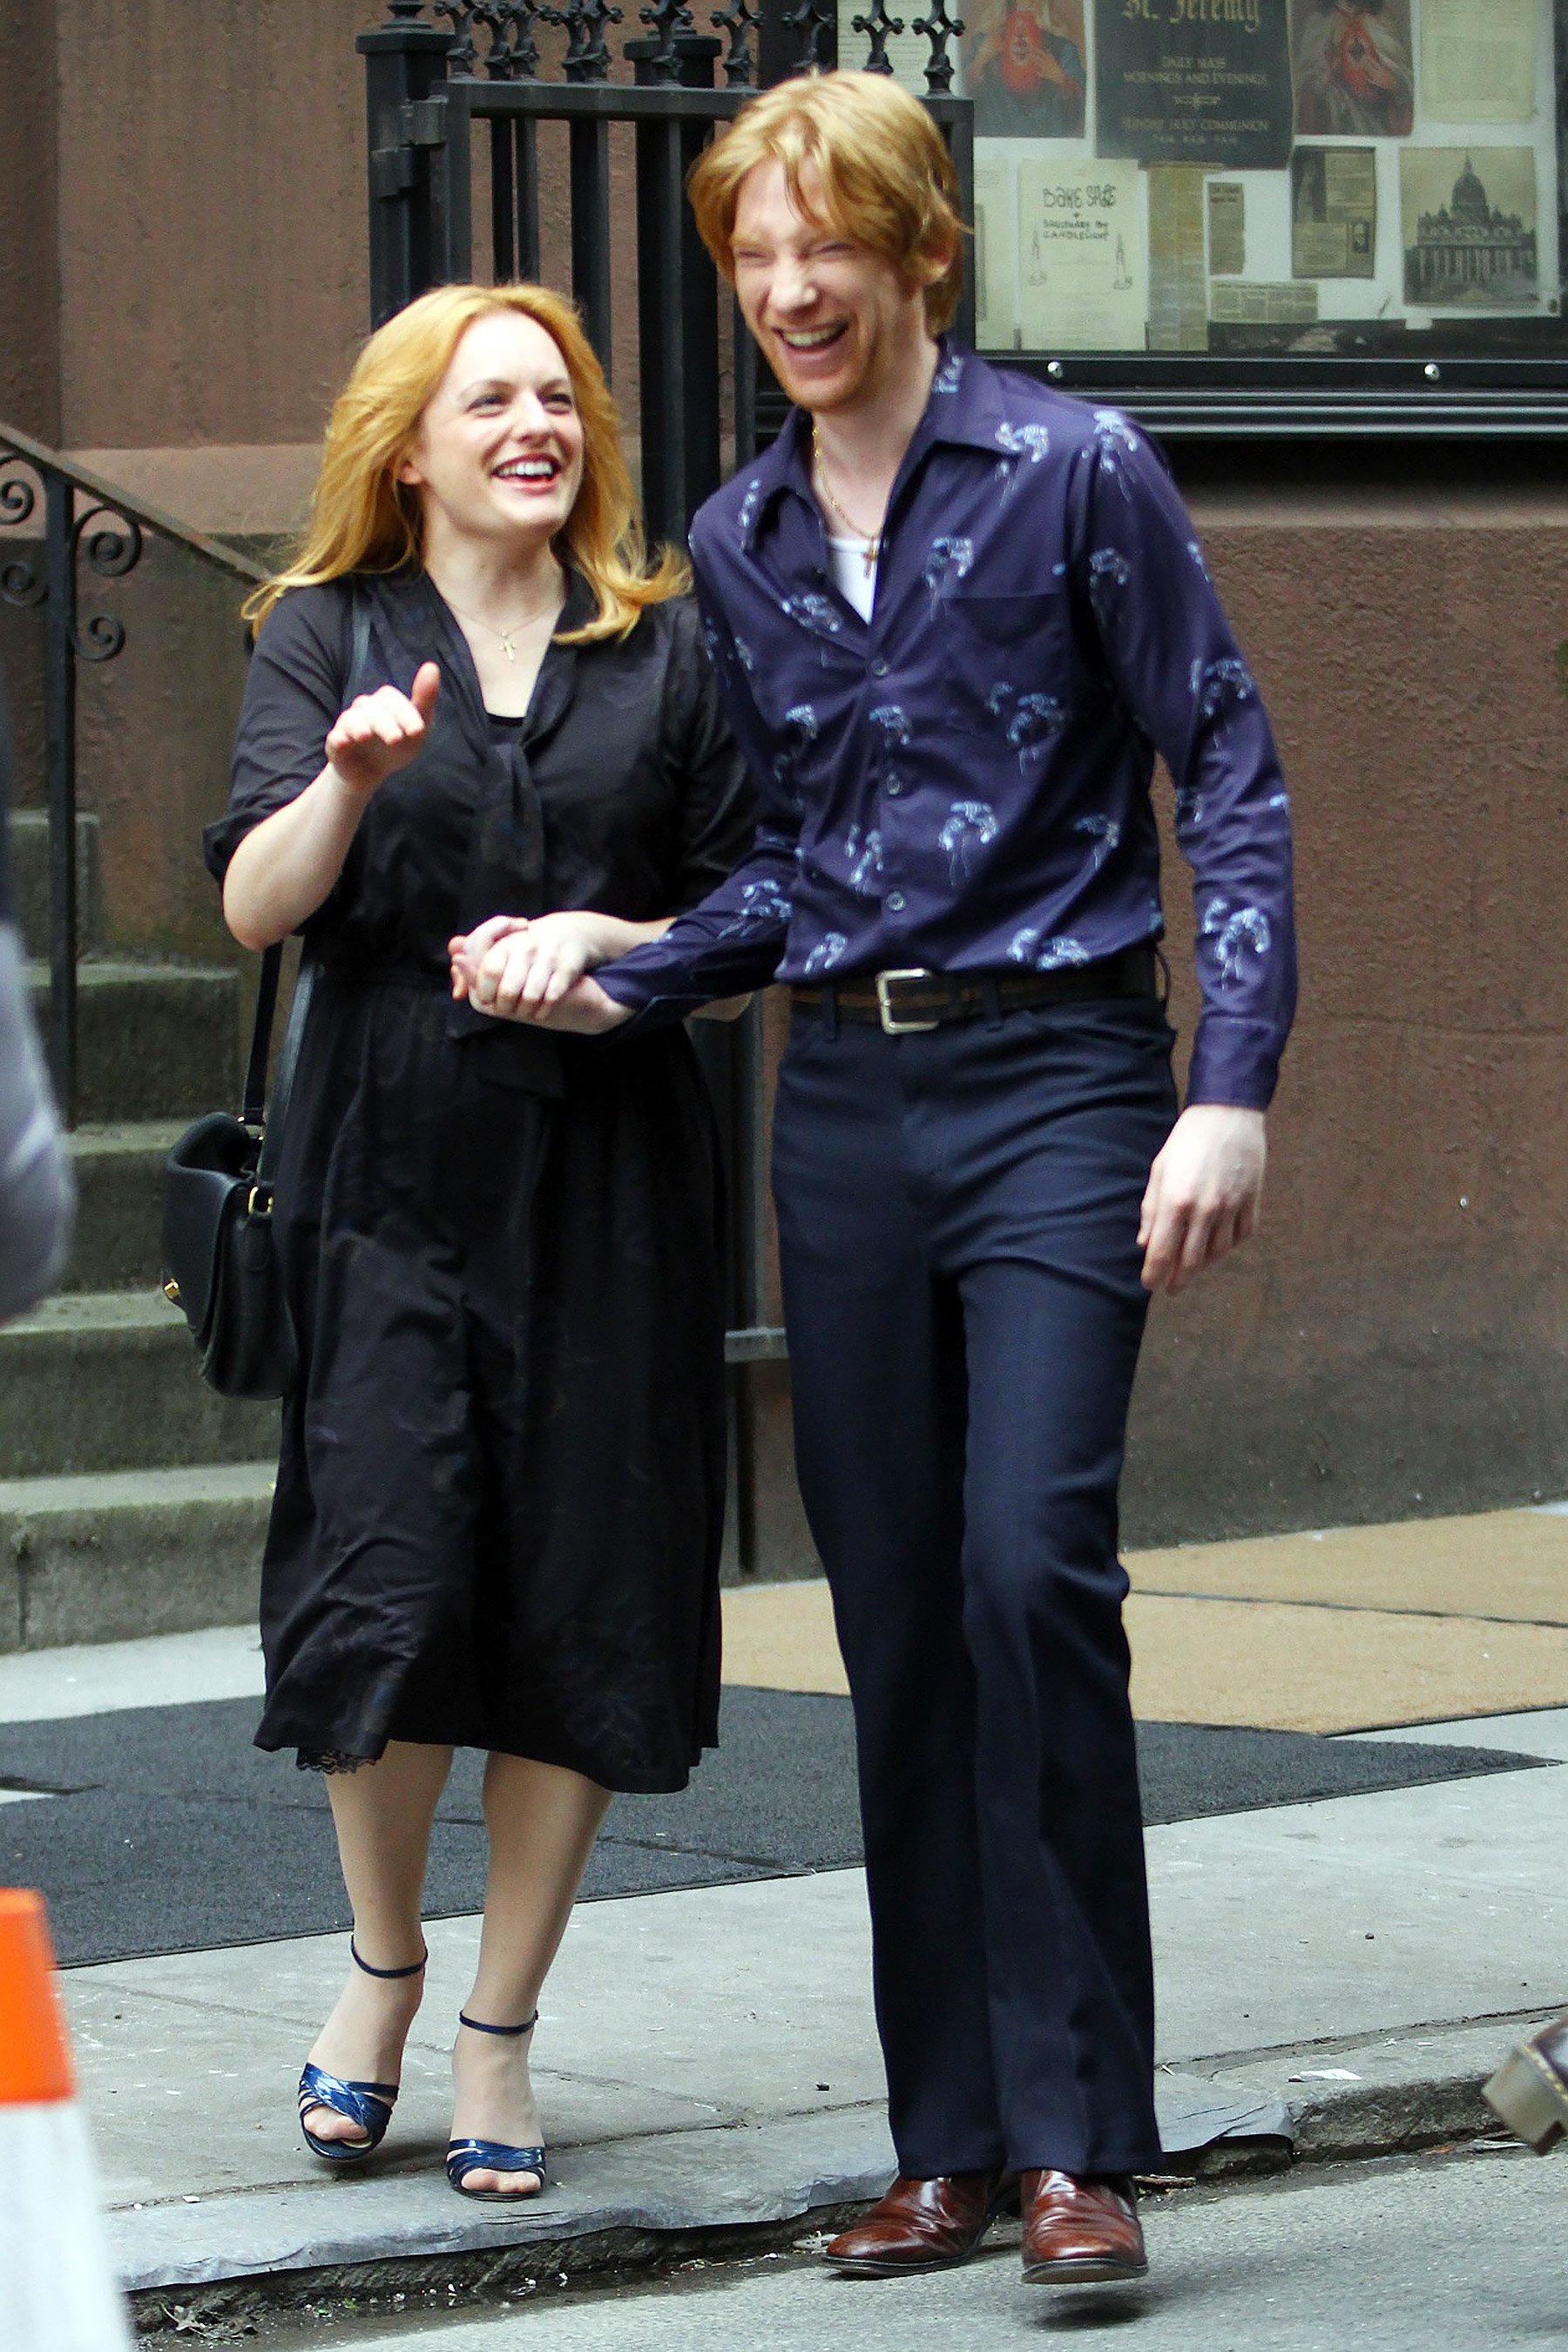 Elisabeth Moss and Domhnall Gleeson are caught in a candid moment while filming The Kitchen.